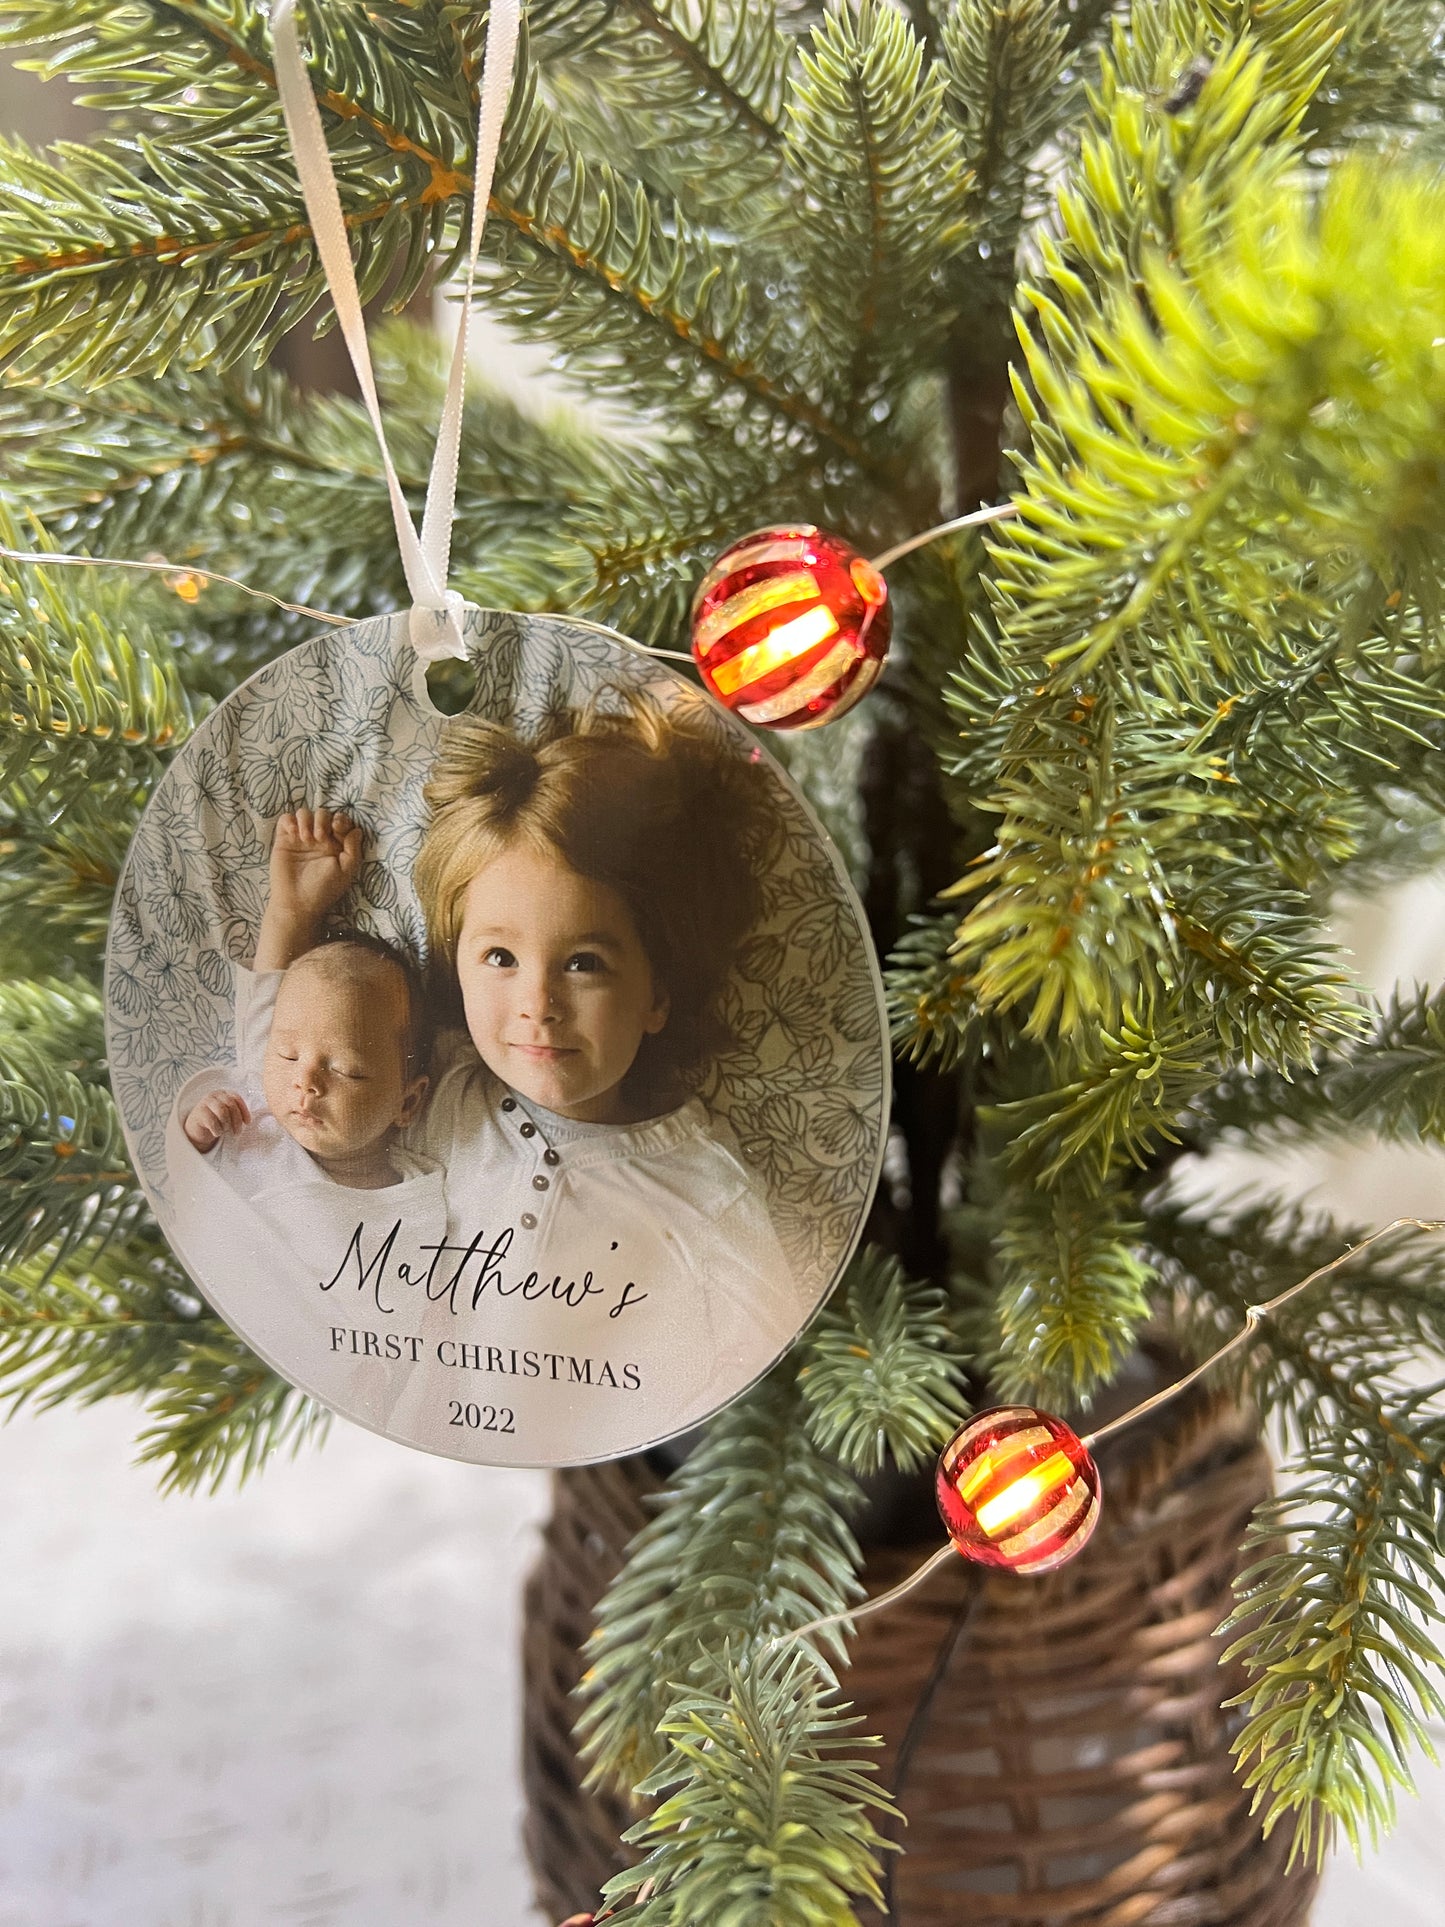 Personalized Photo Ornament w/ Any Picture Optional Text Xmas Keepsake Custom 3.5" Acrylic Baby's First Christmas 2022 Tree Decorations Gift